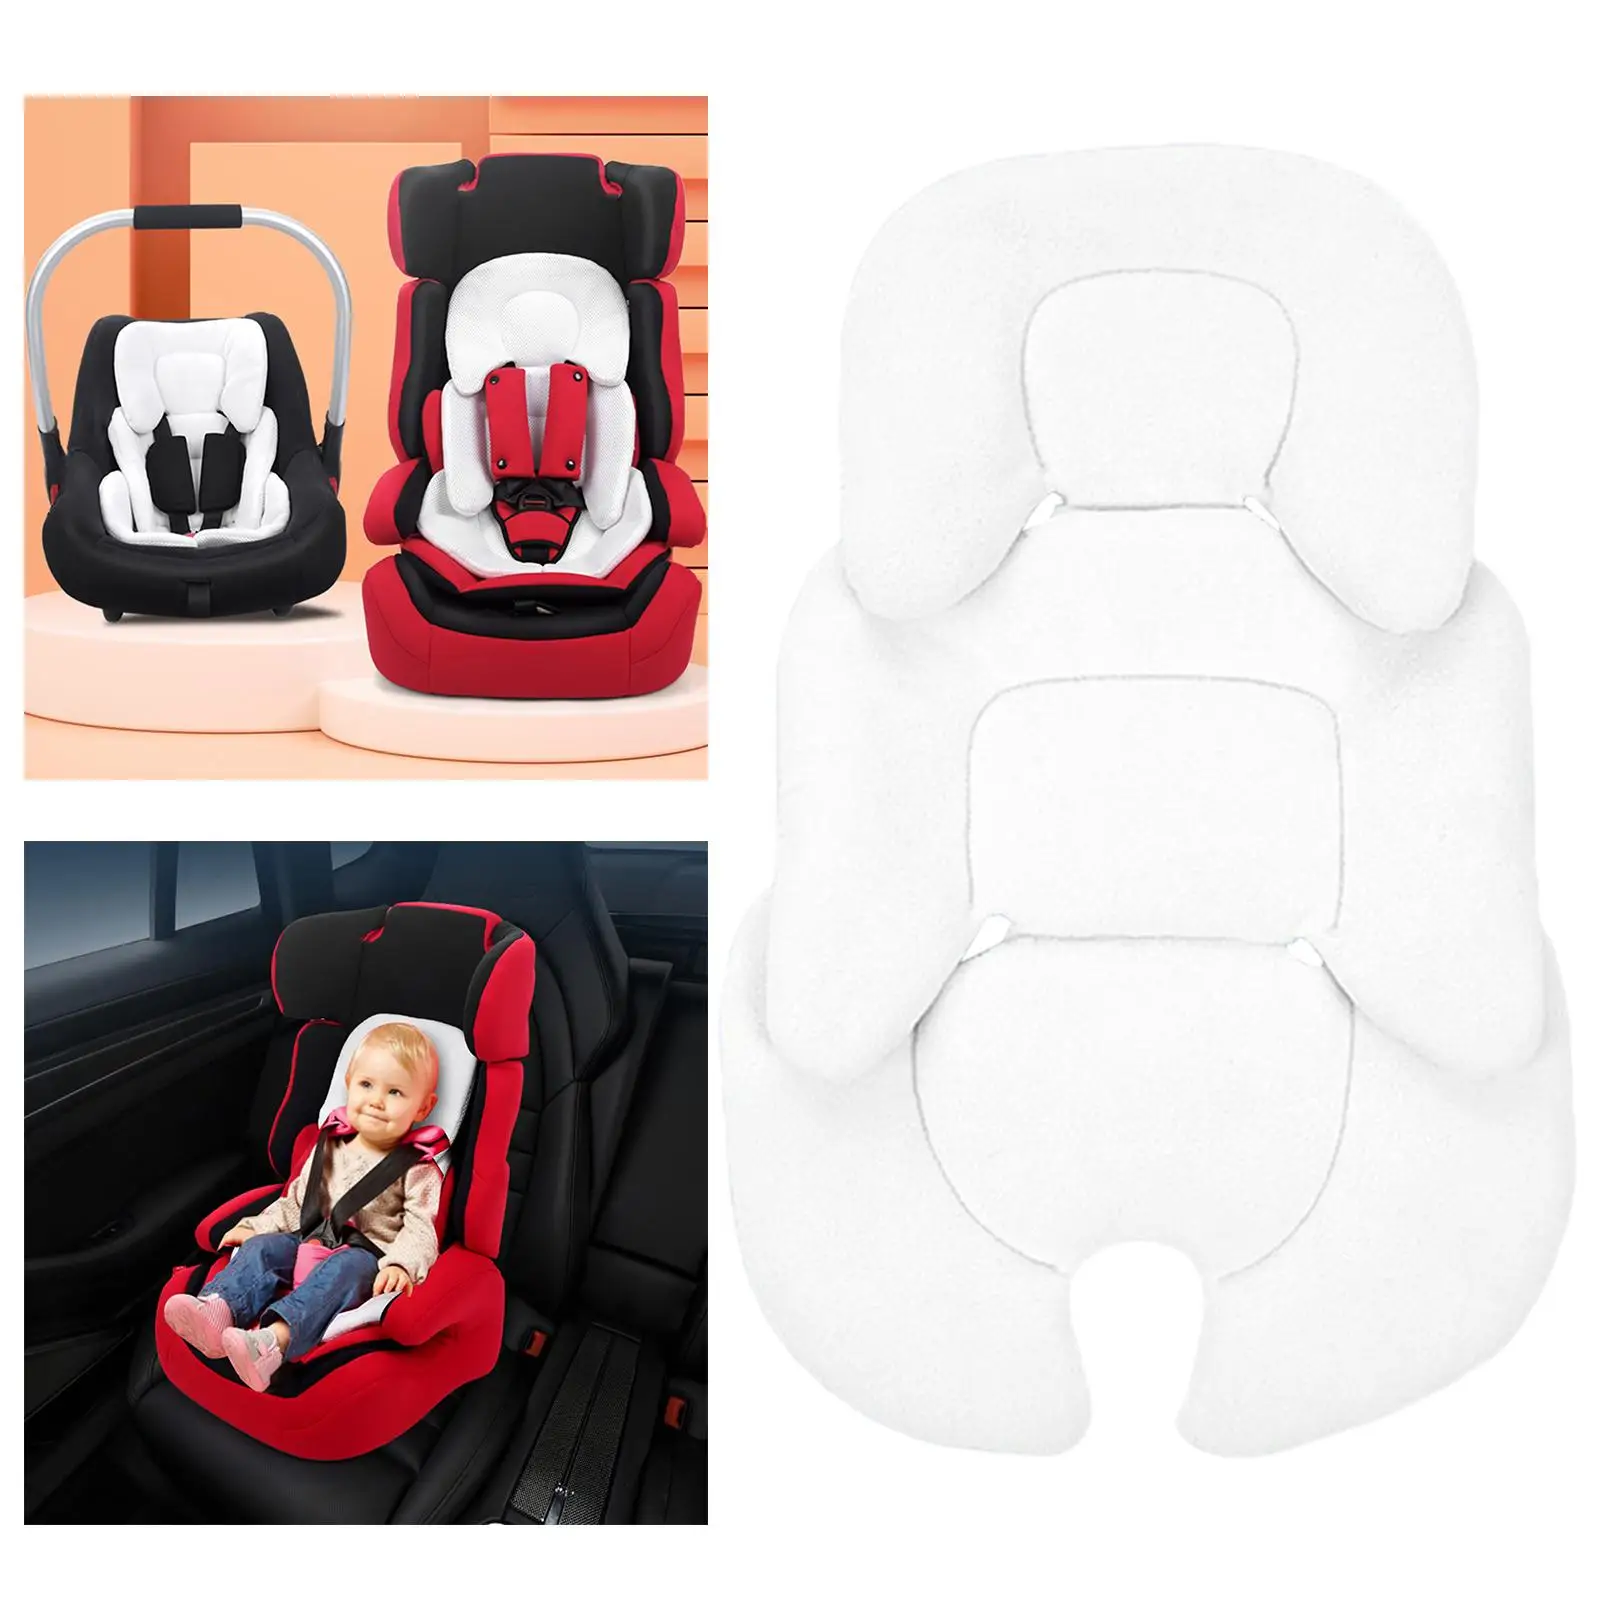 Baby Stroller Cushion Head and Body Support Pillow Car Seat Pad Liner Baby Shower Gifts Car Seat Insert for Baby Newborn Infant